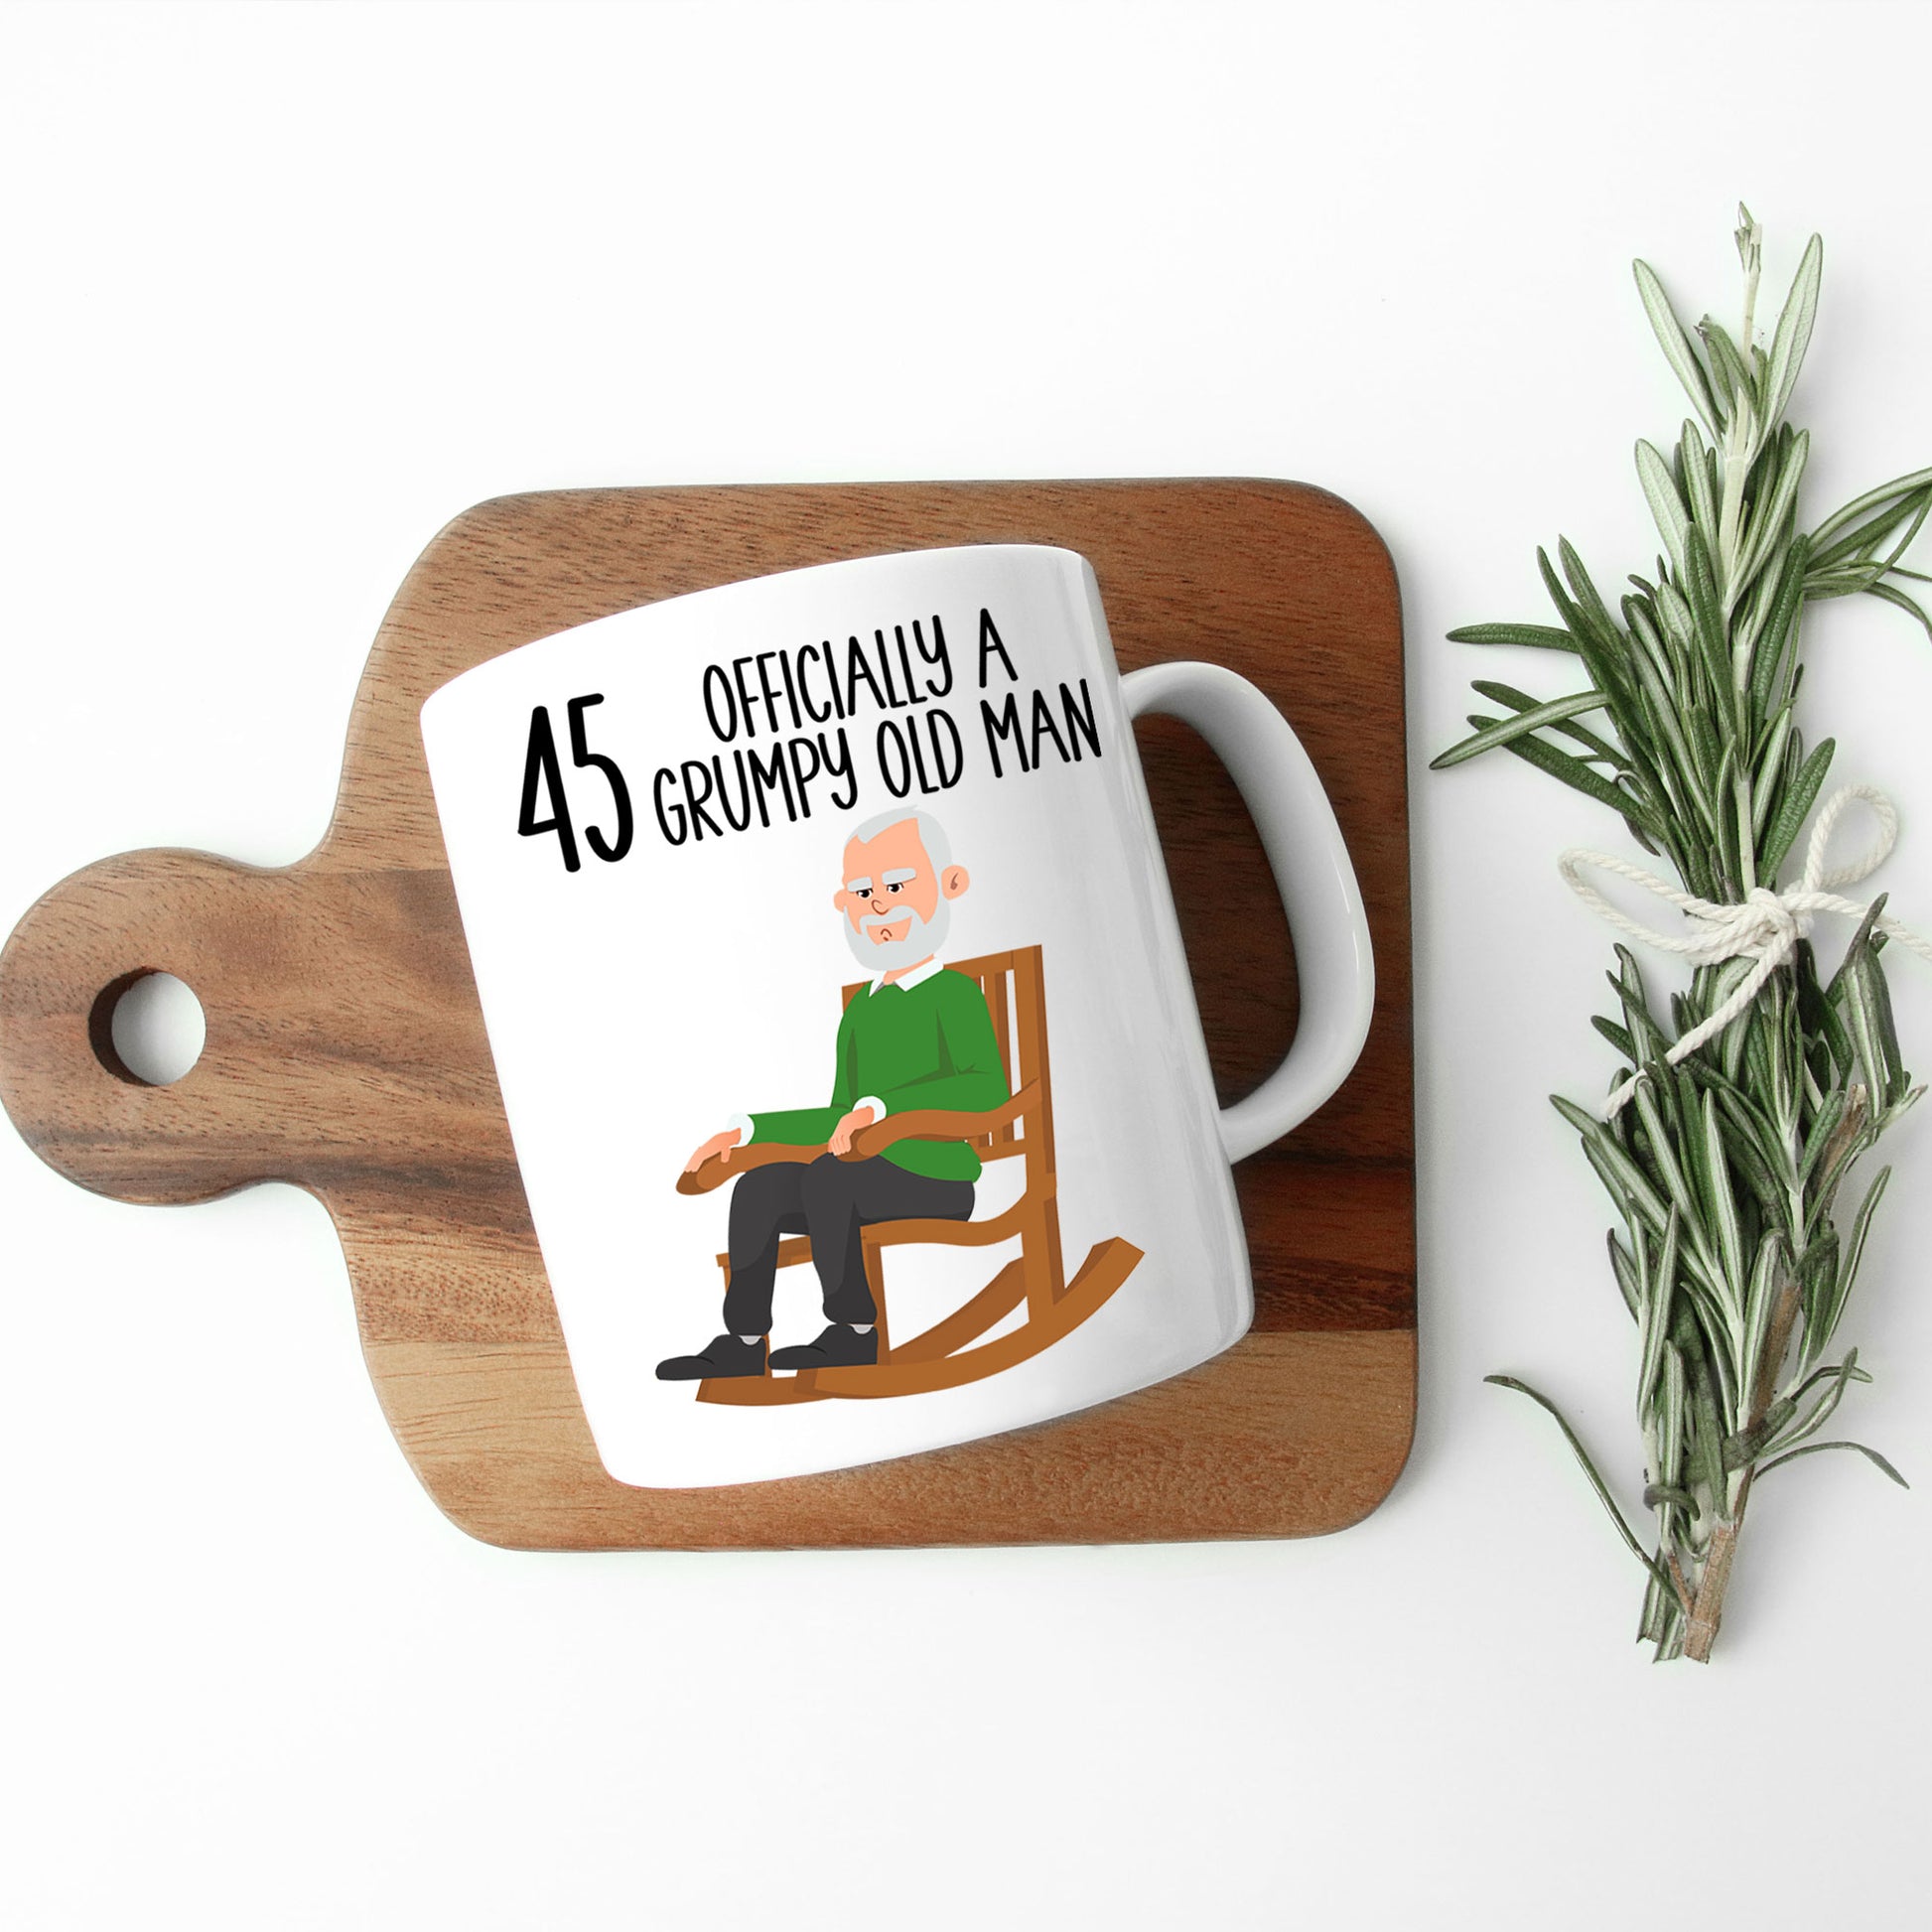 45 Officially A Grumpy Old Man Mug and/or Coaster Gift  - Always Looking Good -   